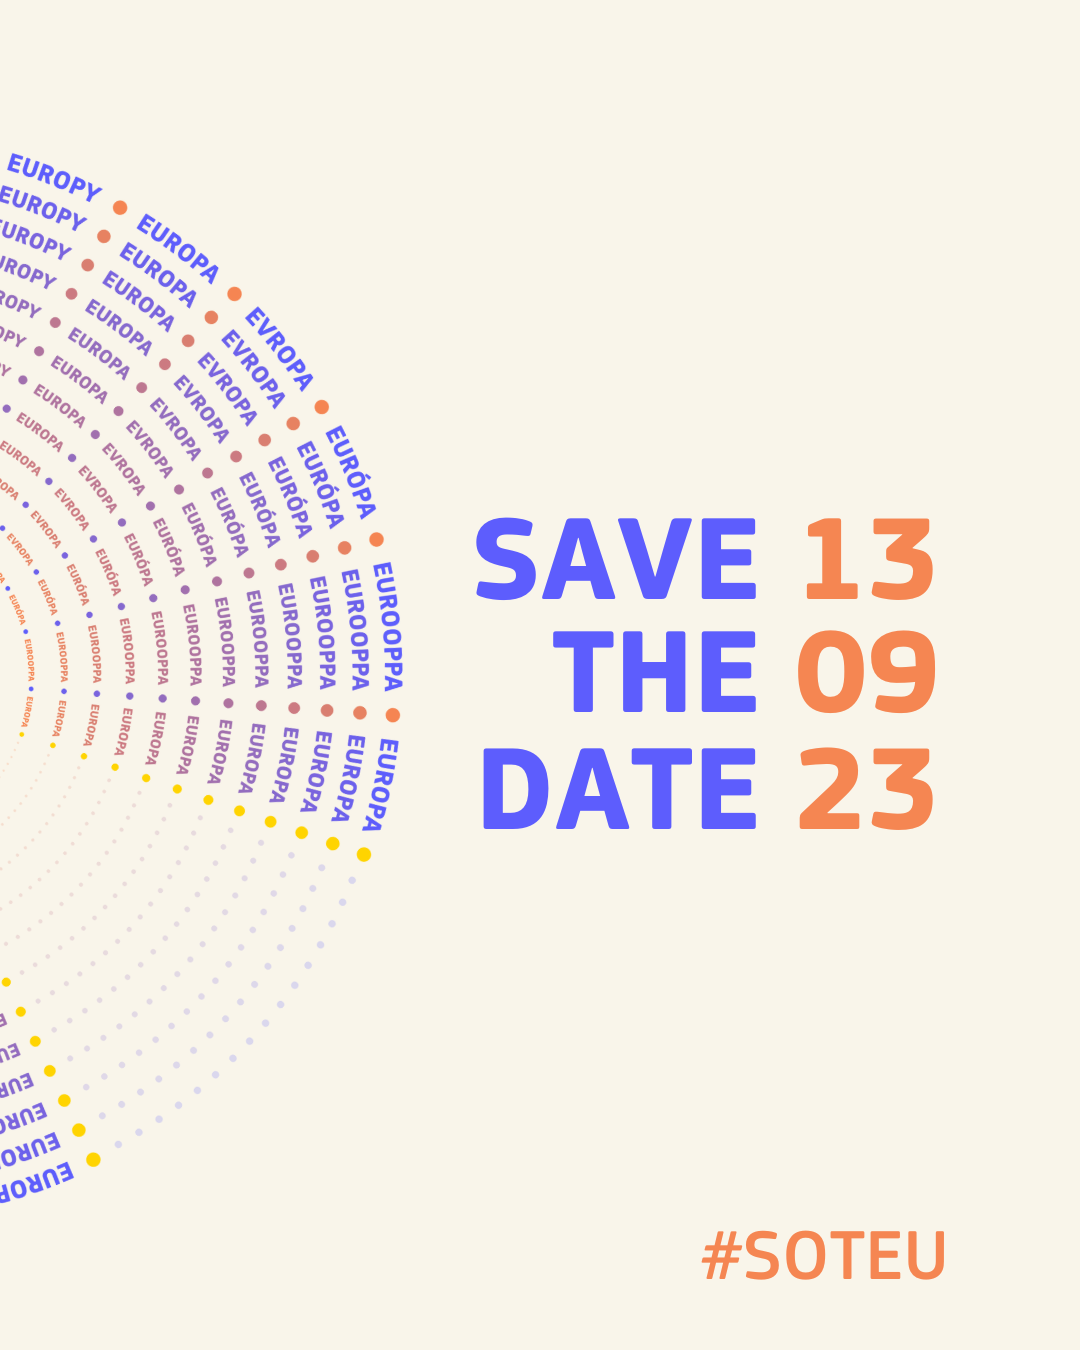 Save the date Instagram feed 3